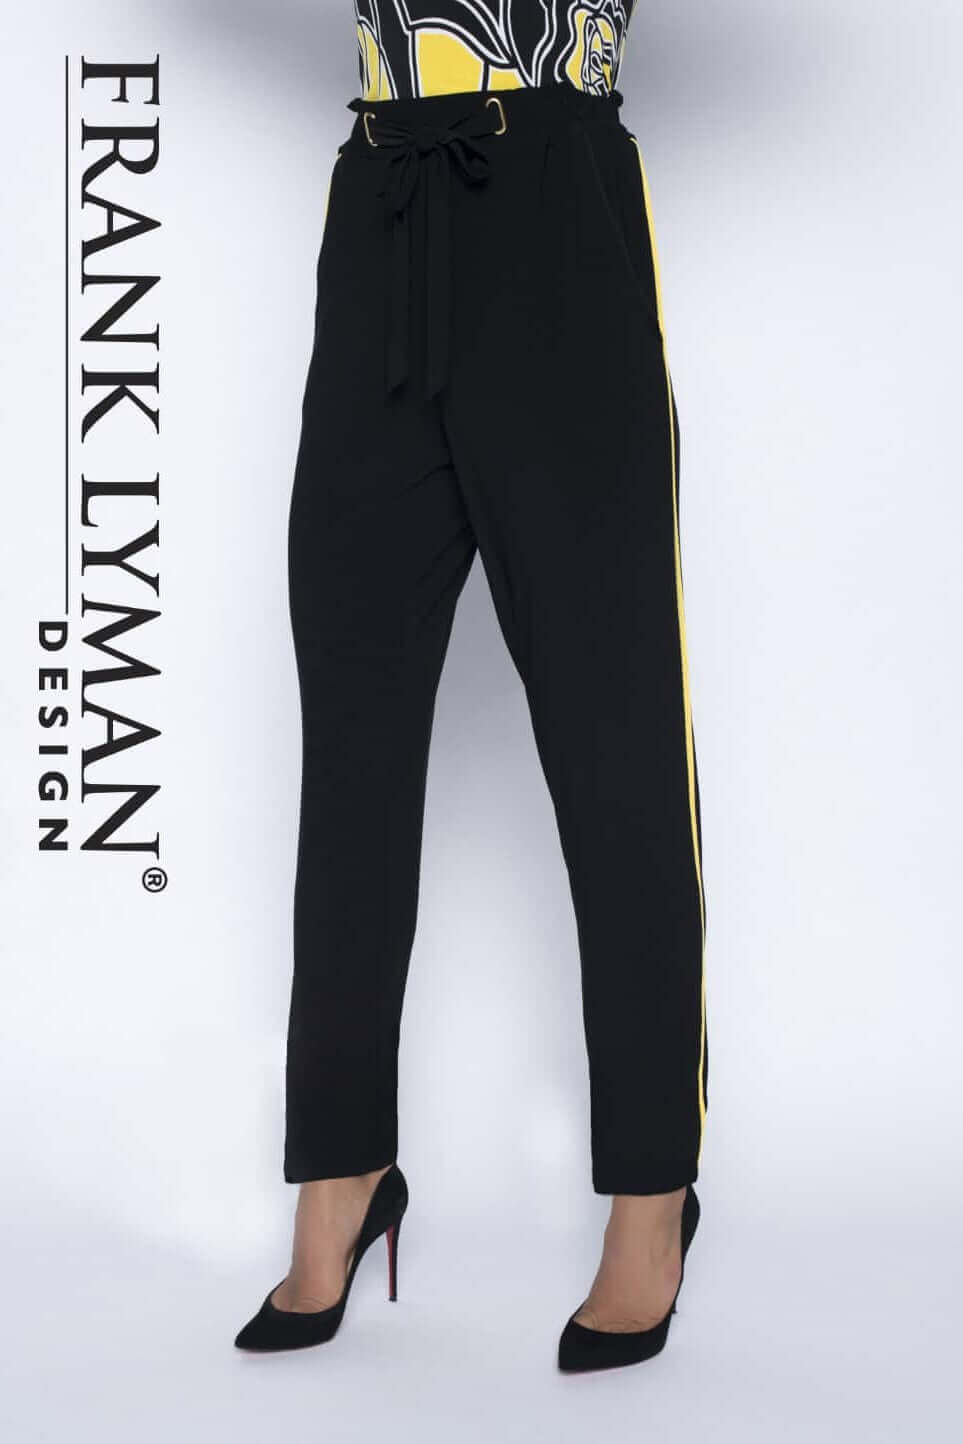 Frank Lyman Pant Style 191037 Black/Yellow from BelleMiaBoutique.com 